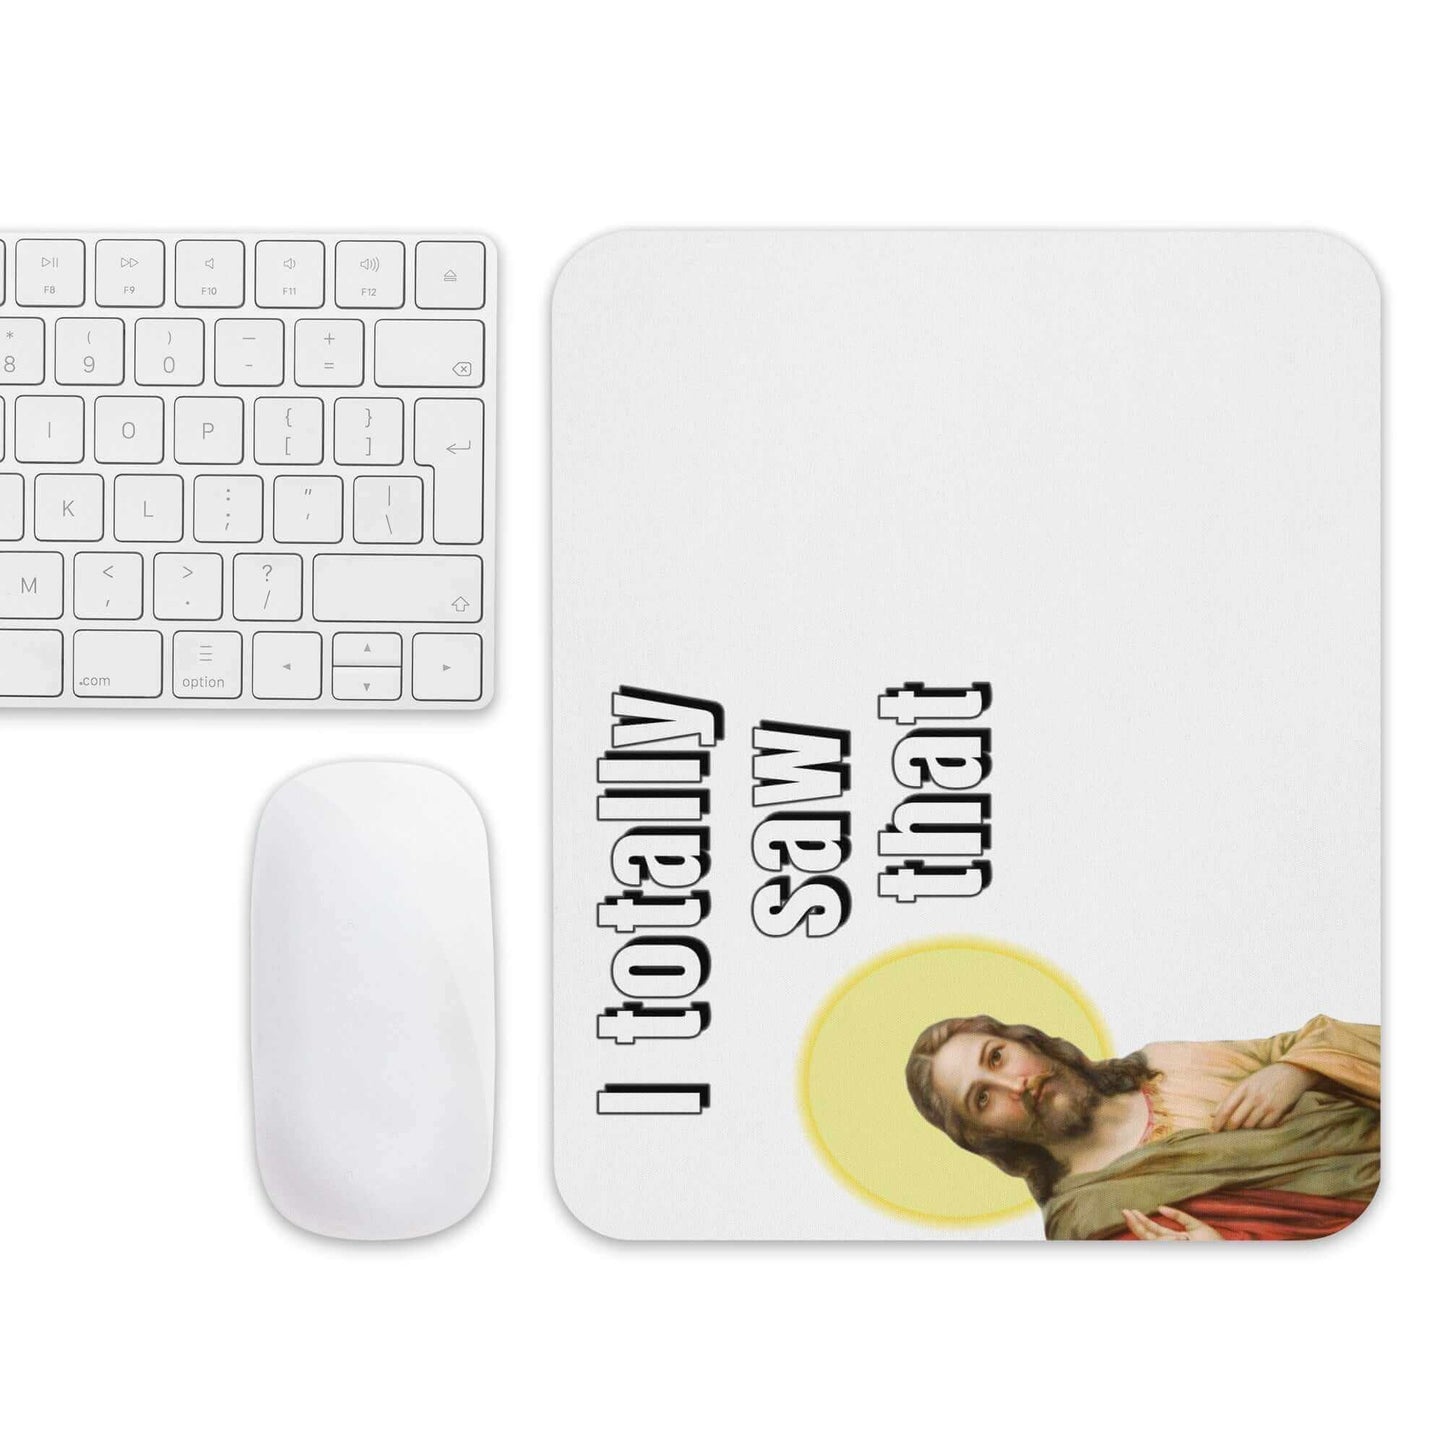 I totally saw that - Mouse pad - Horrible Designs